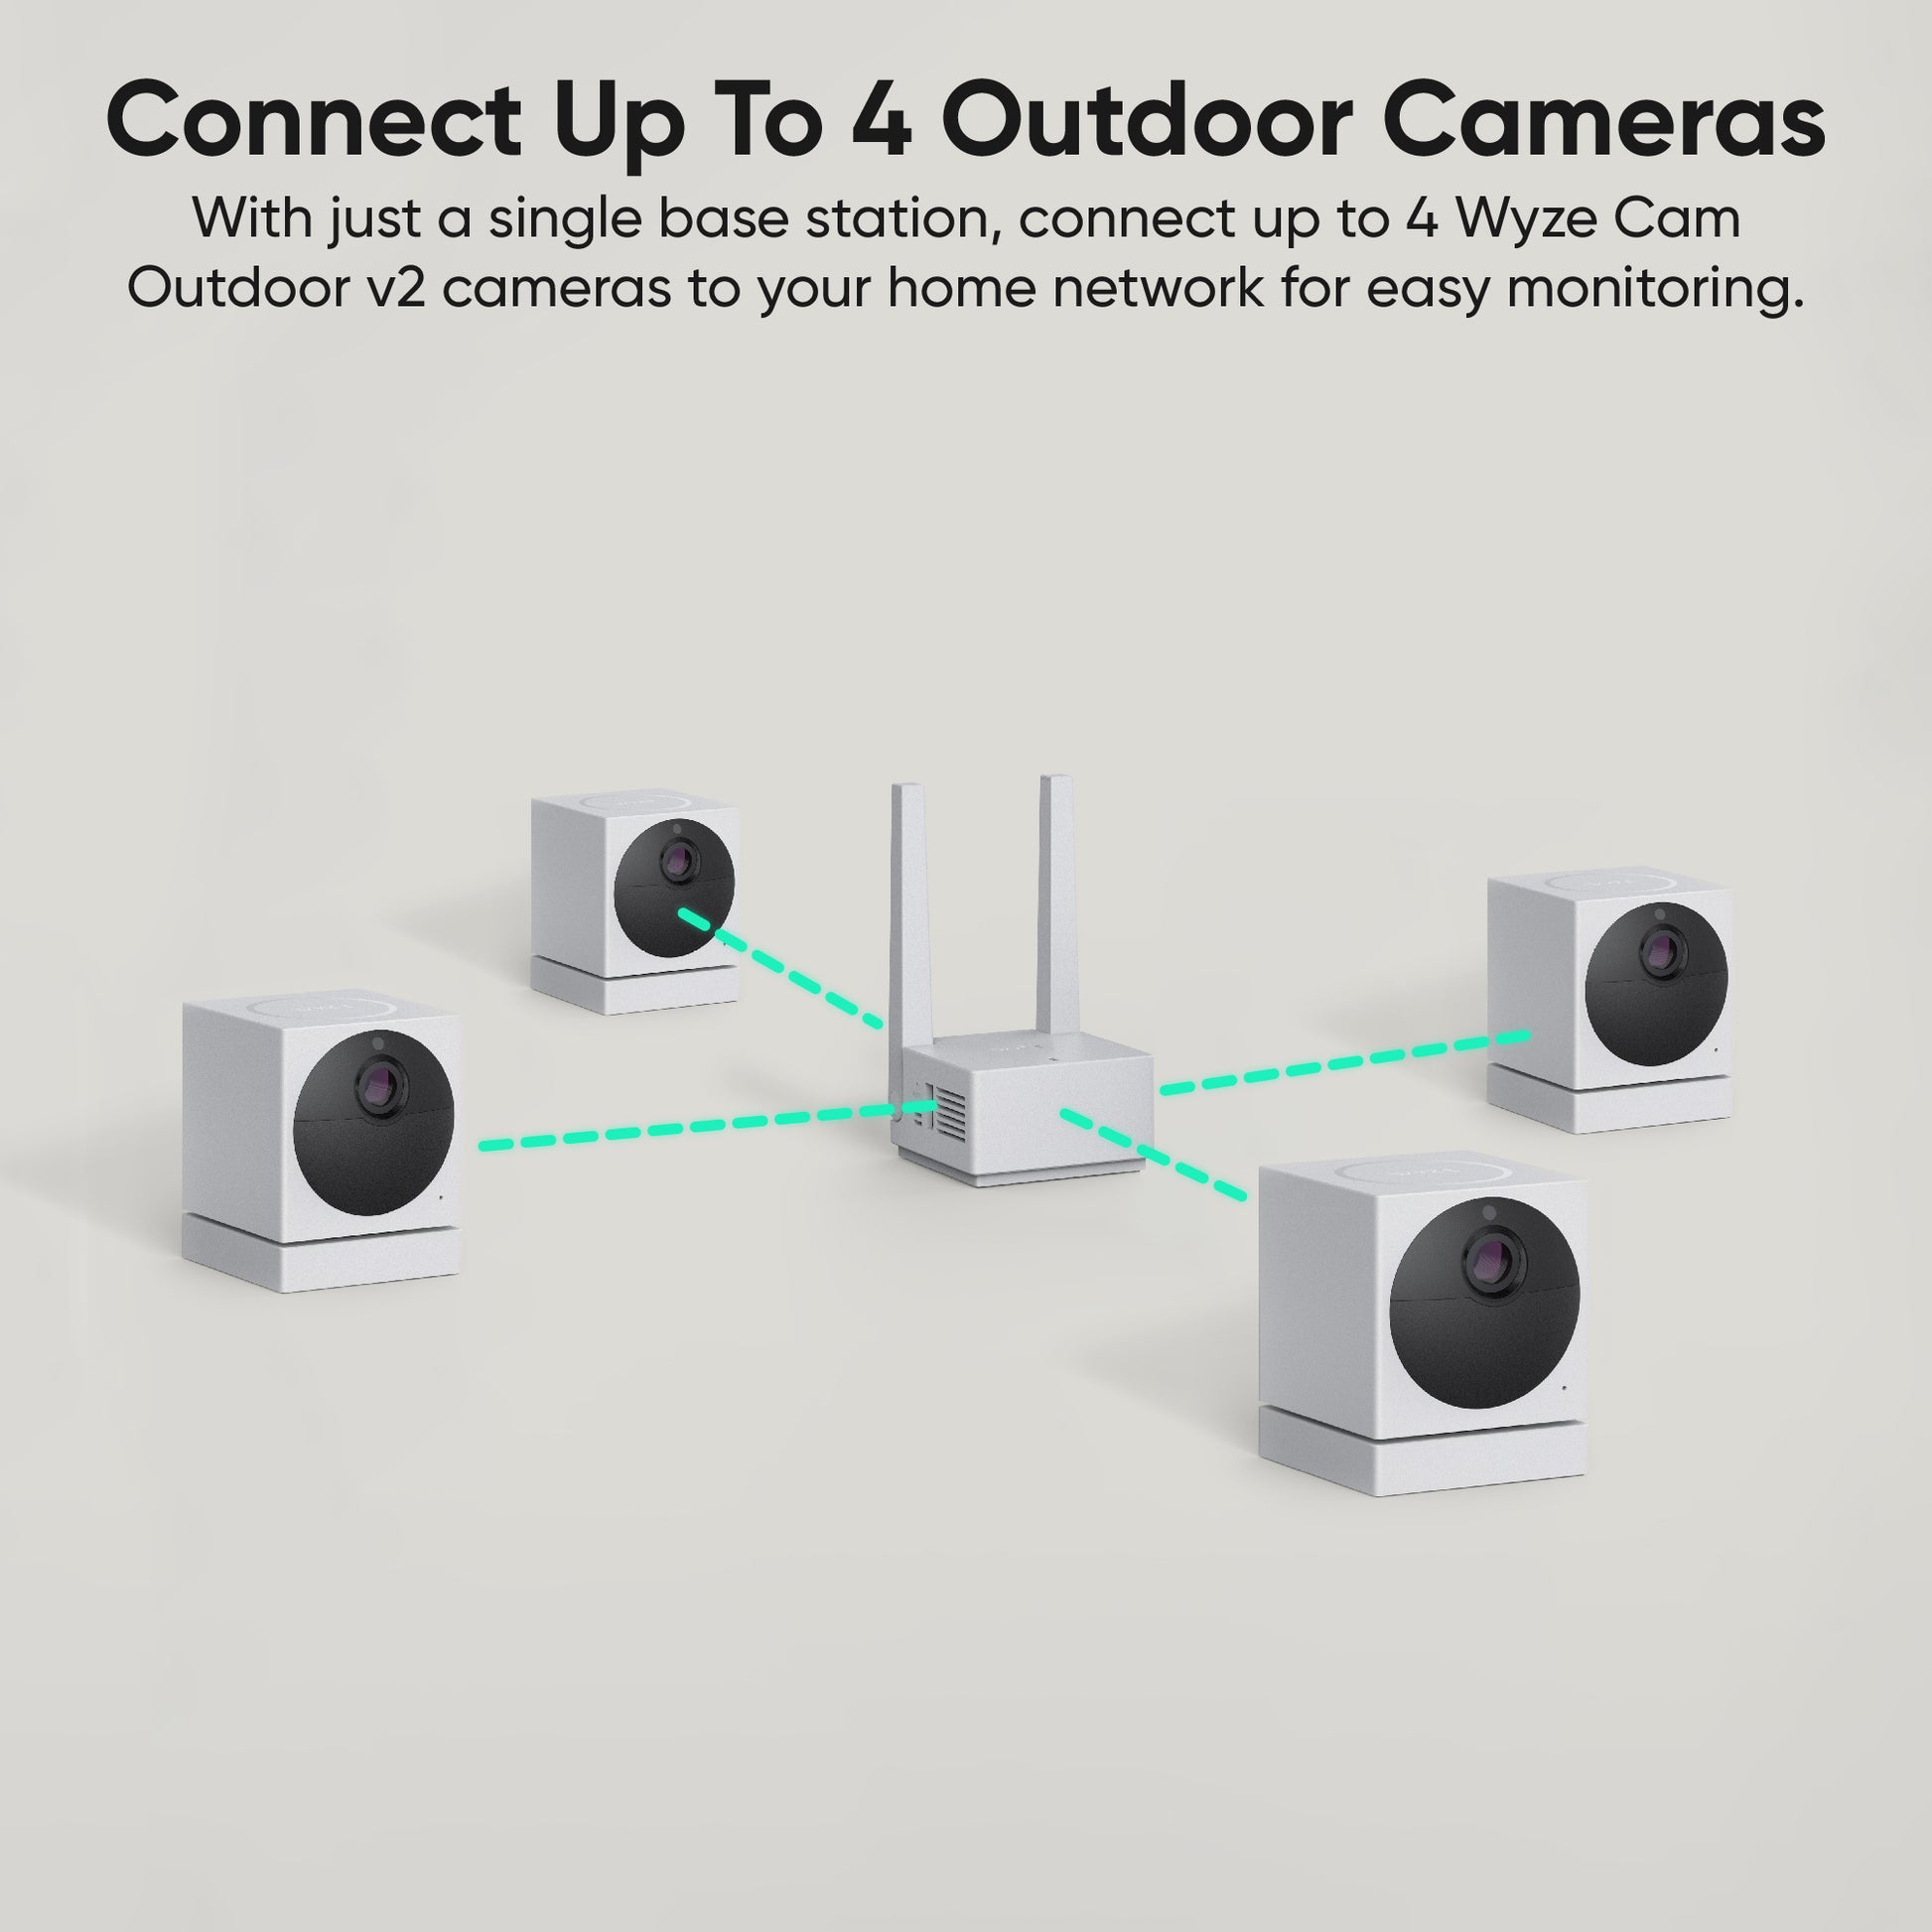 Eufy Security 4G Starlight Camera review: Surveillance without the Wi-Fi  leash